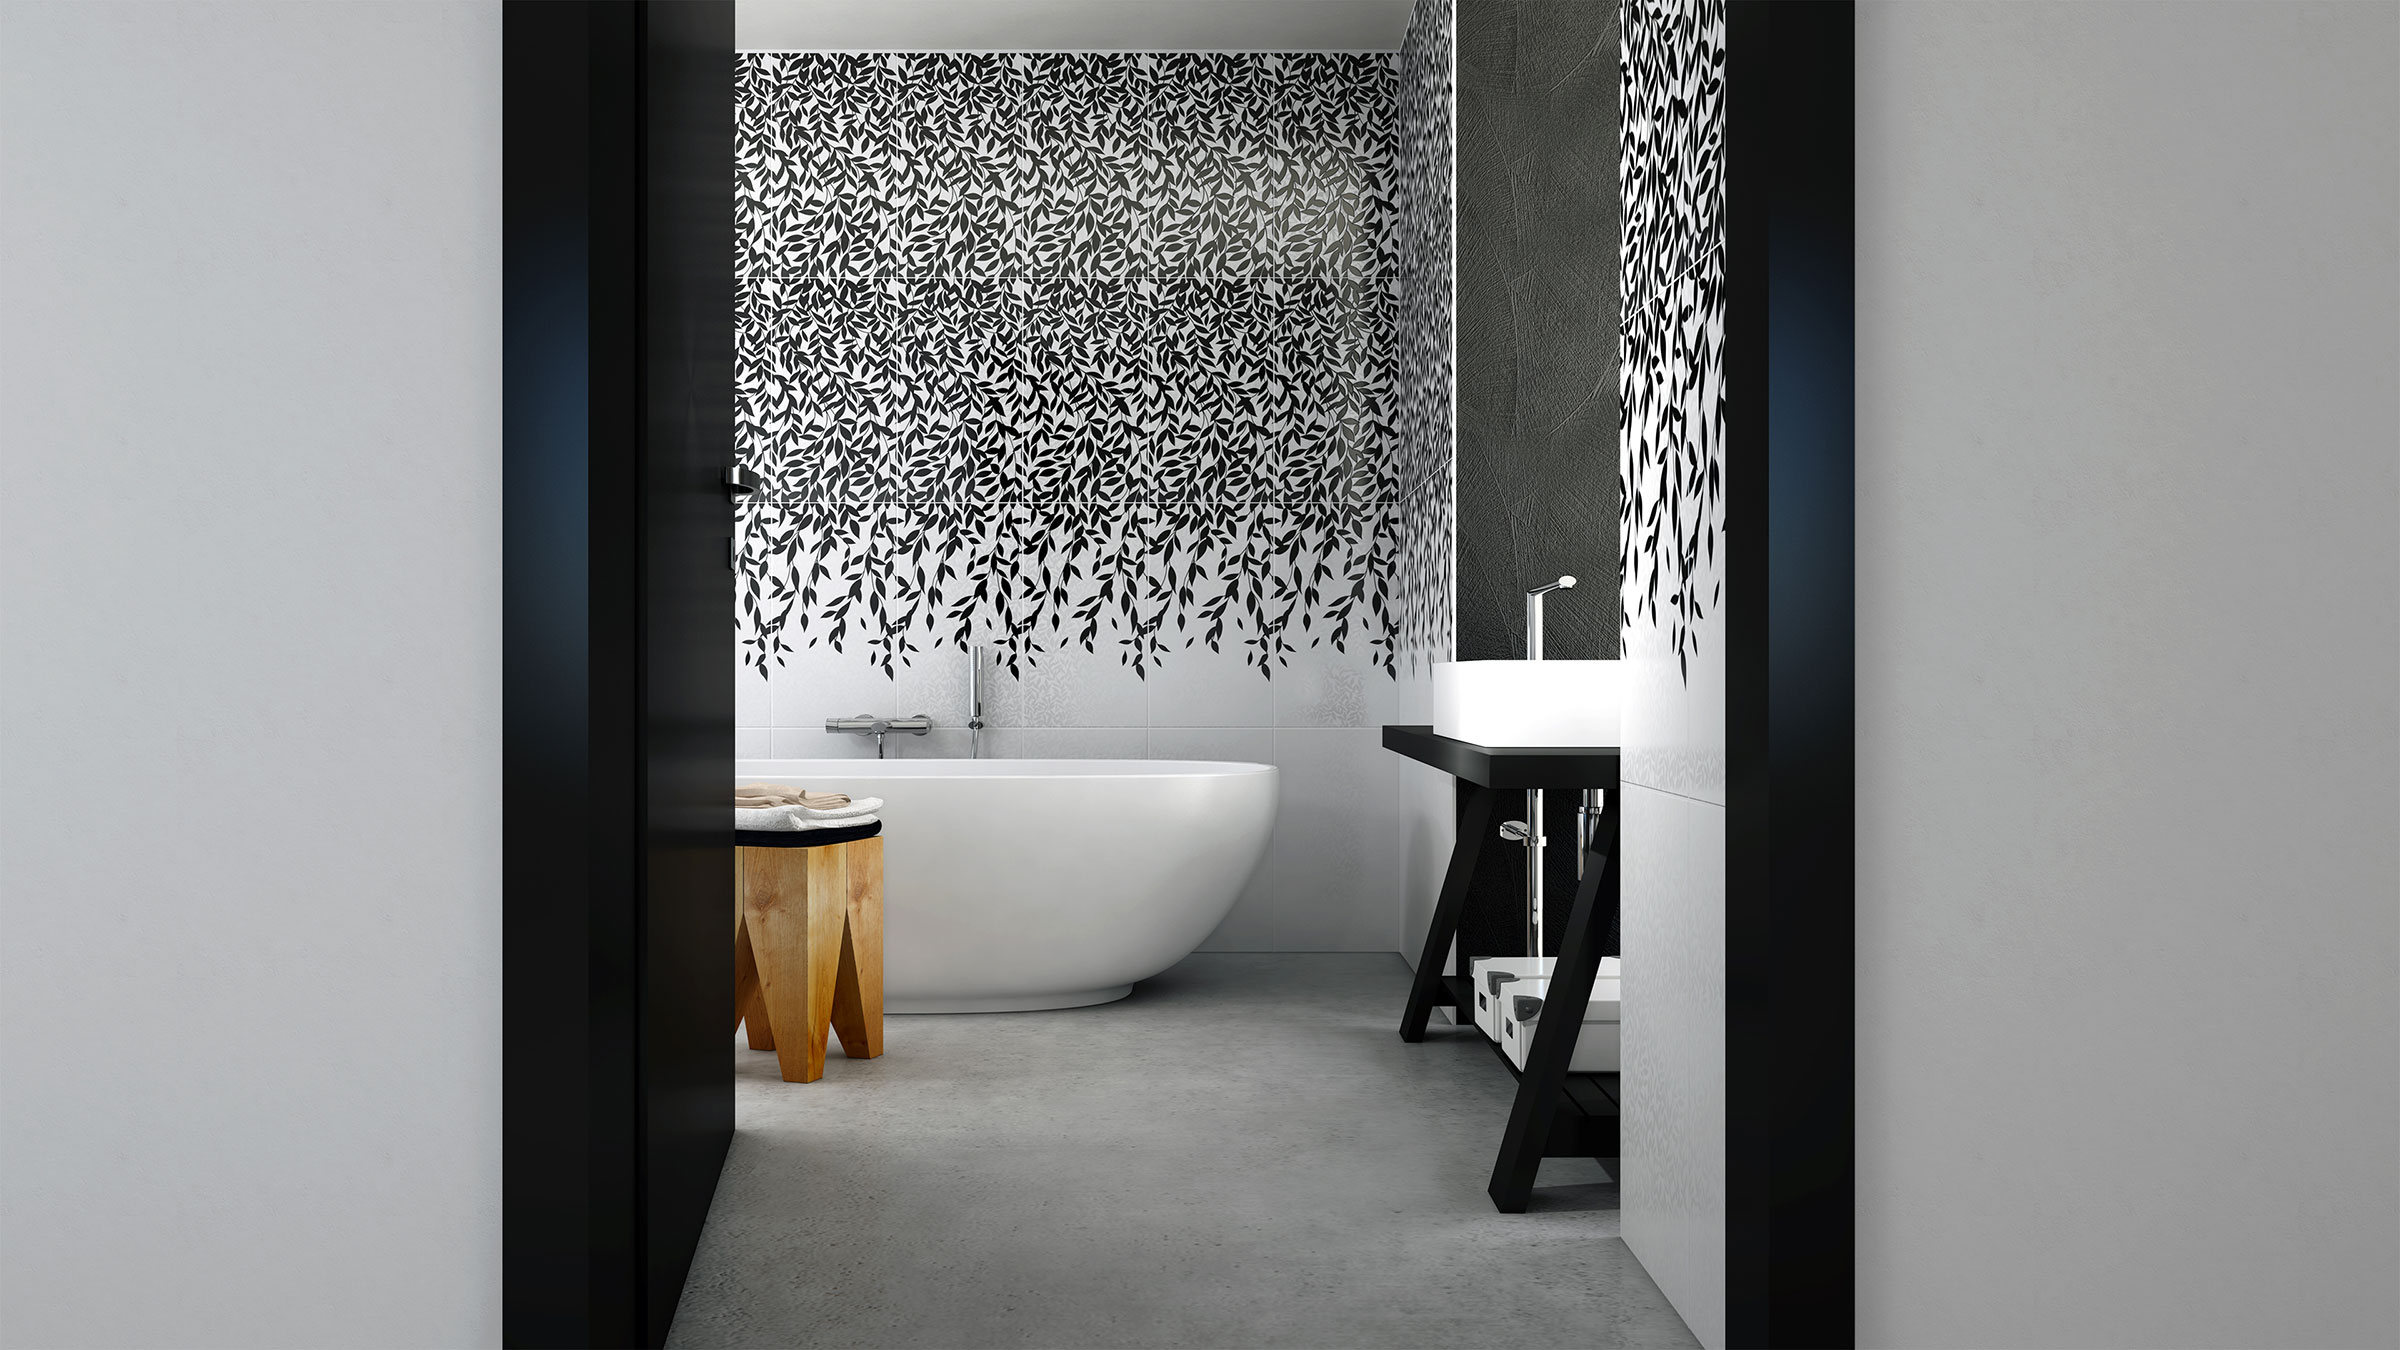 Bathroom rendering with feature wall tiling created with DomuS3D